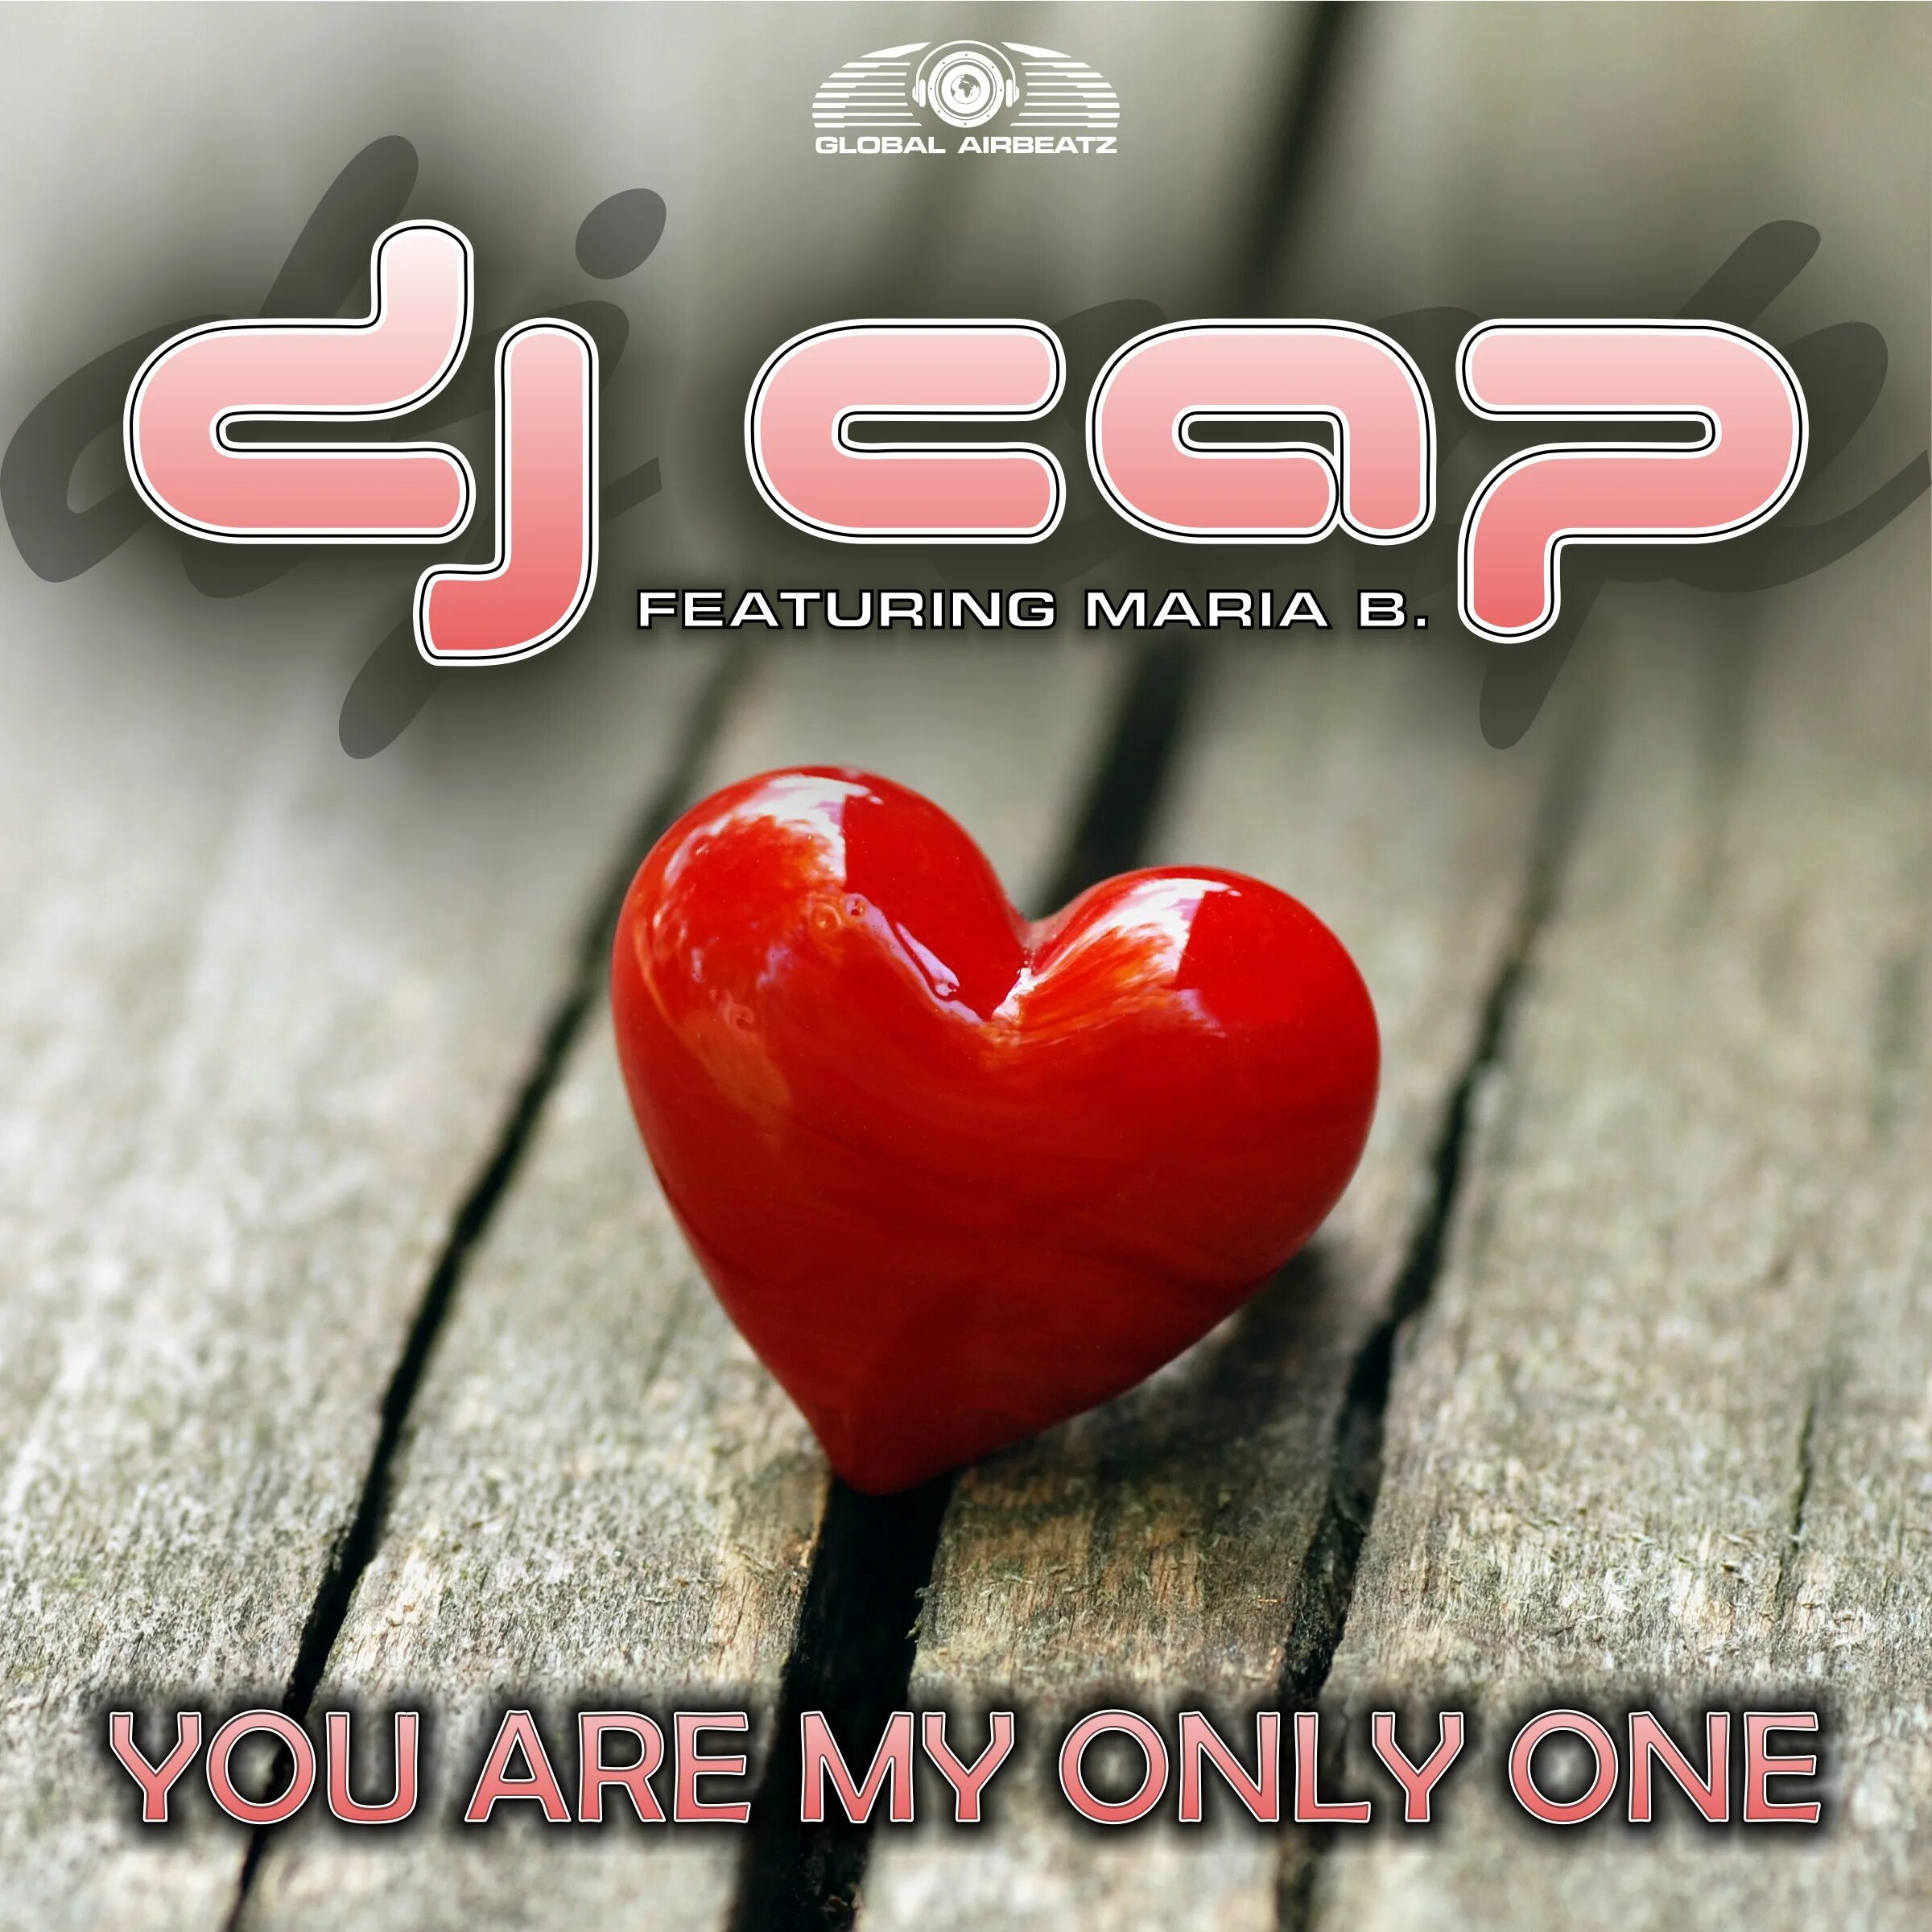 Maria ft. You are my only one. One & one (Radio Edit). You are the one. The only one.